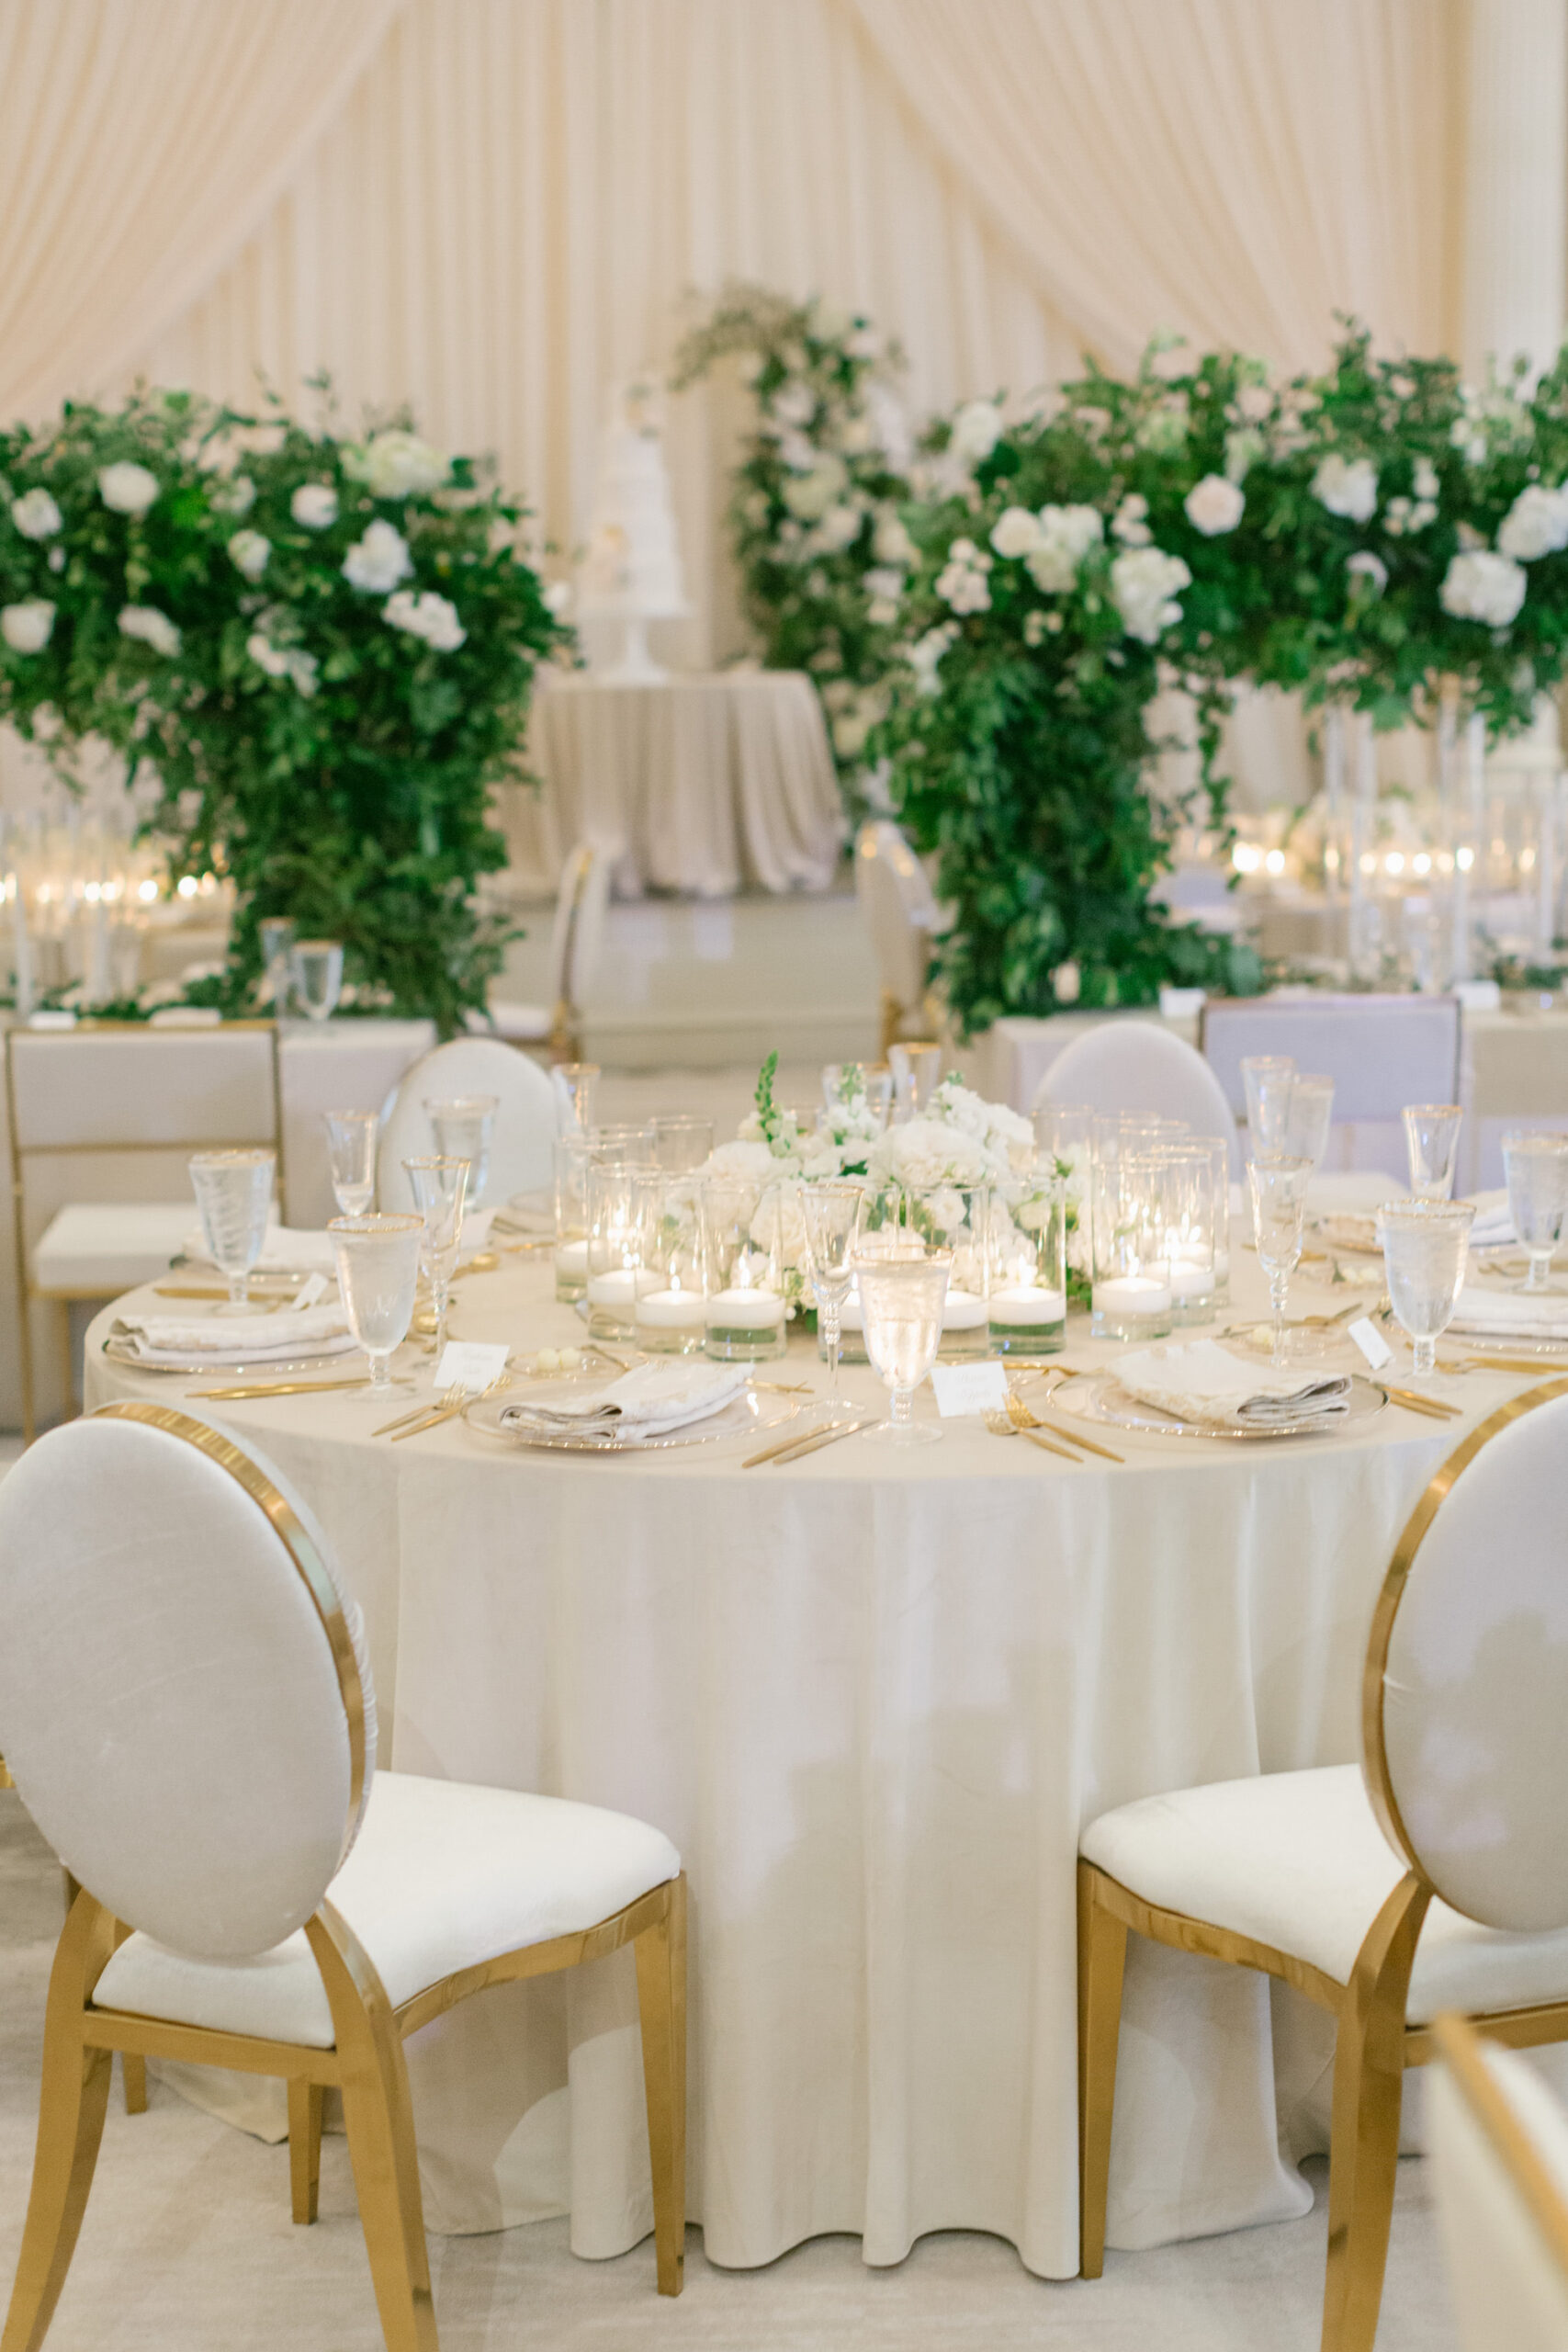 Modern Gold and White Chair Wedding Seating Inspiration | Tampa Bay Rental A Chair Affair | Over the Top Linen Rental